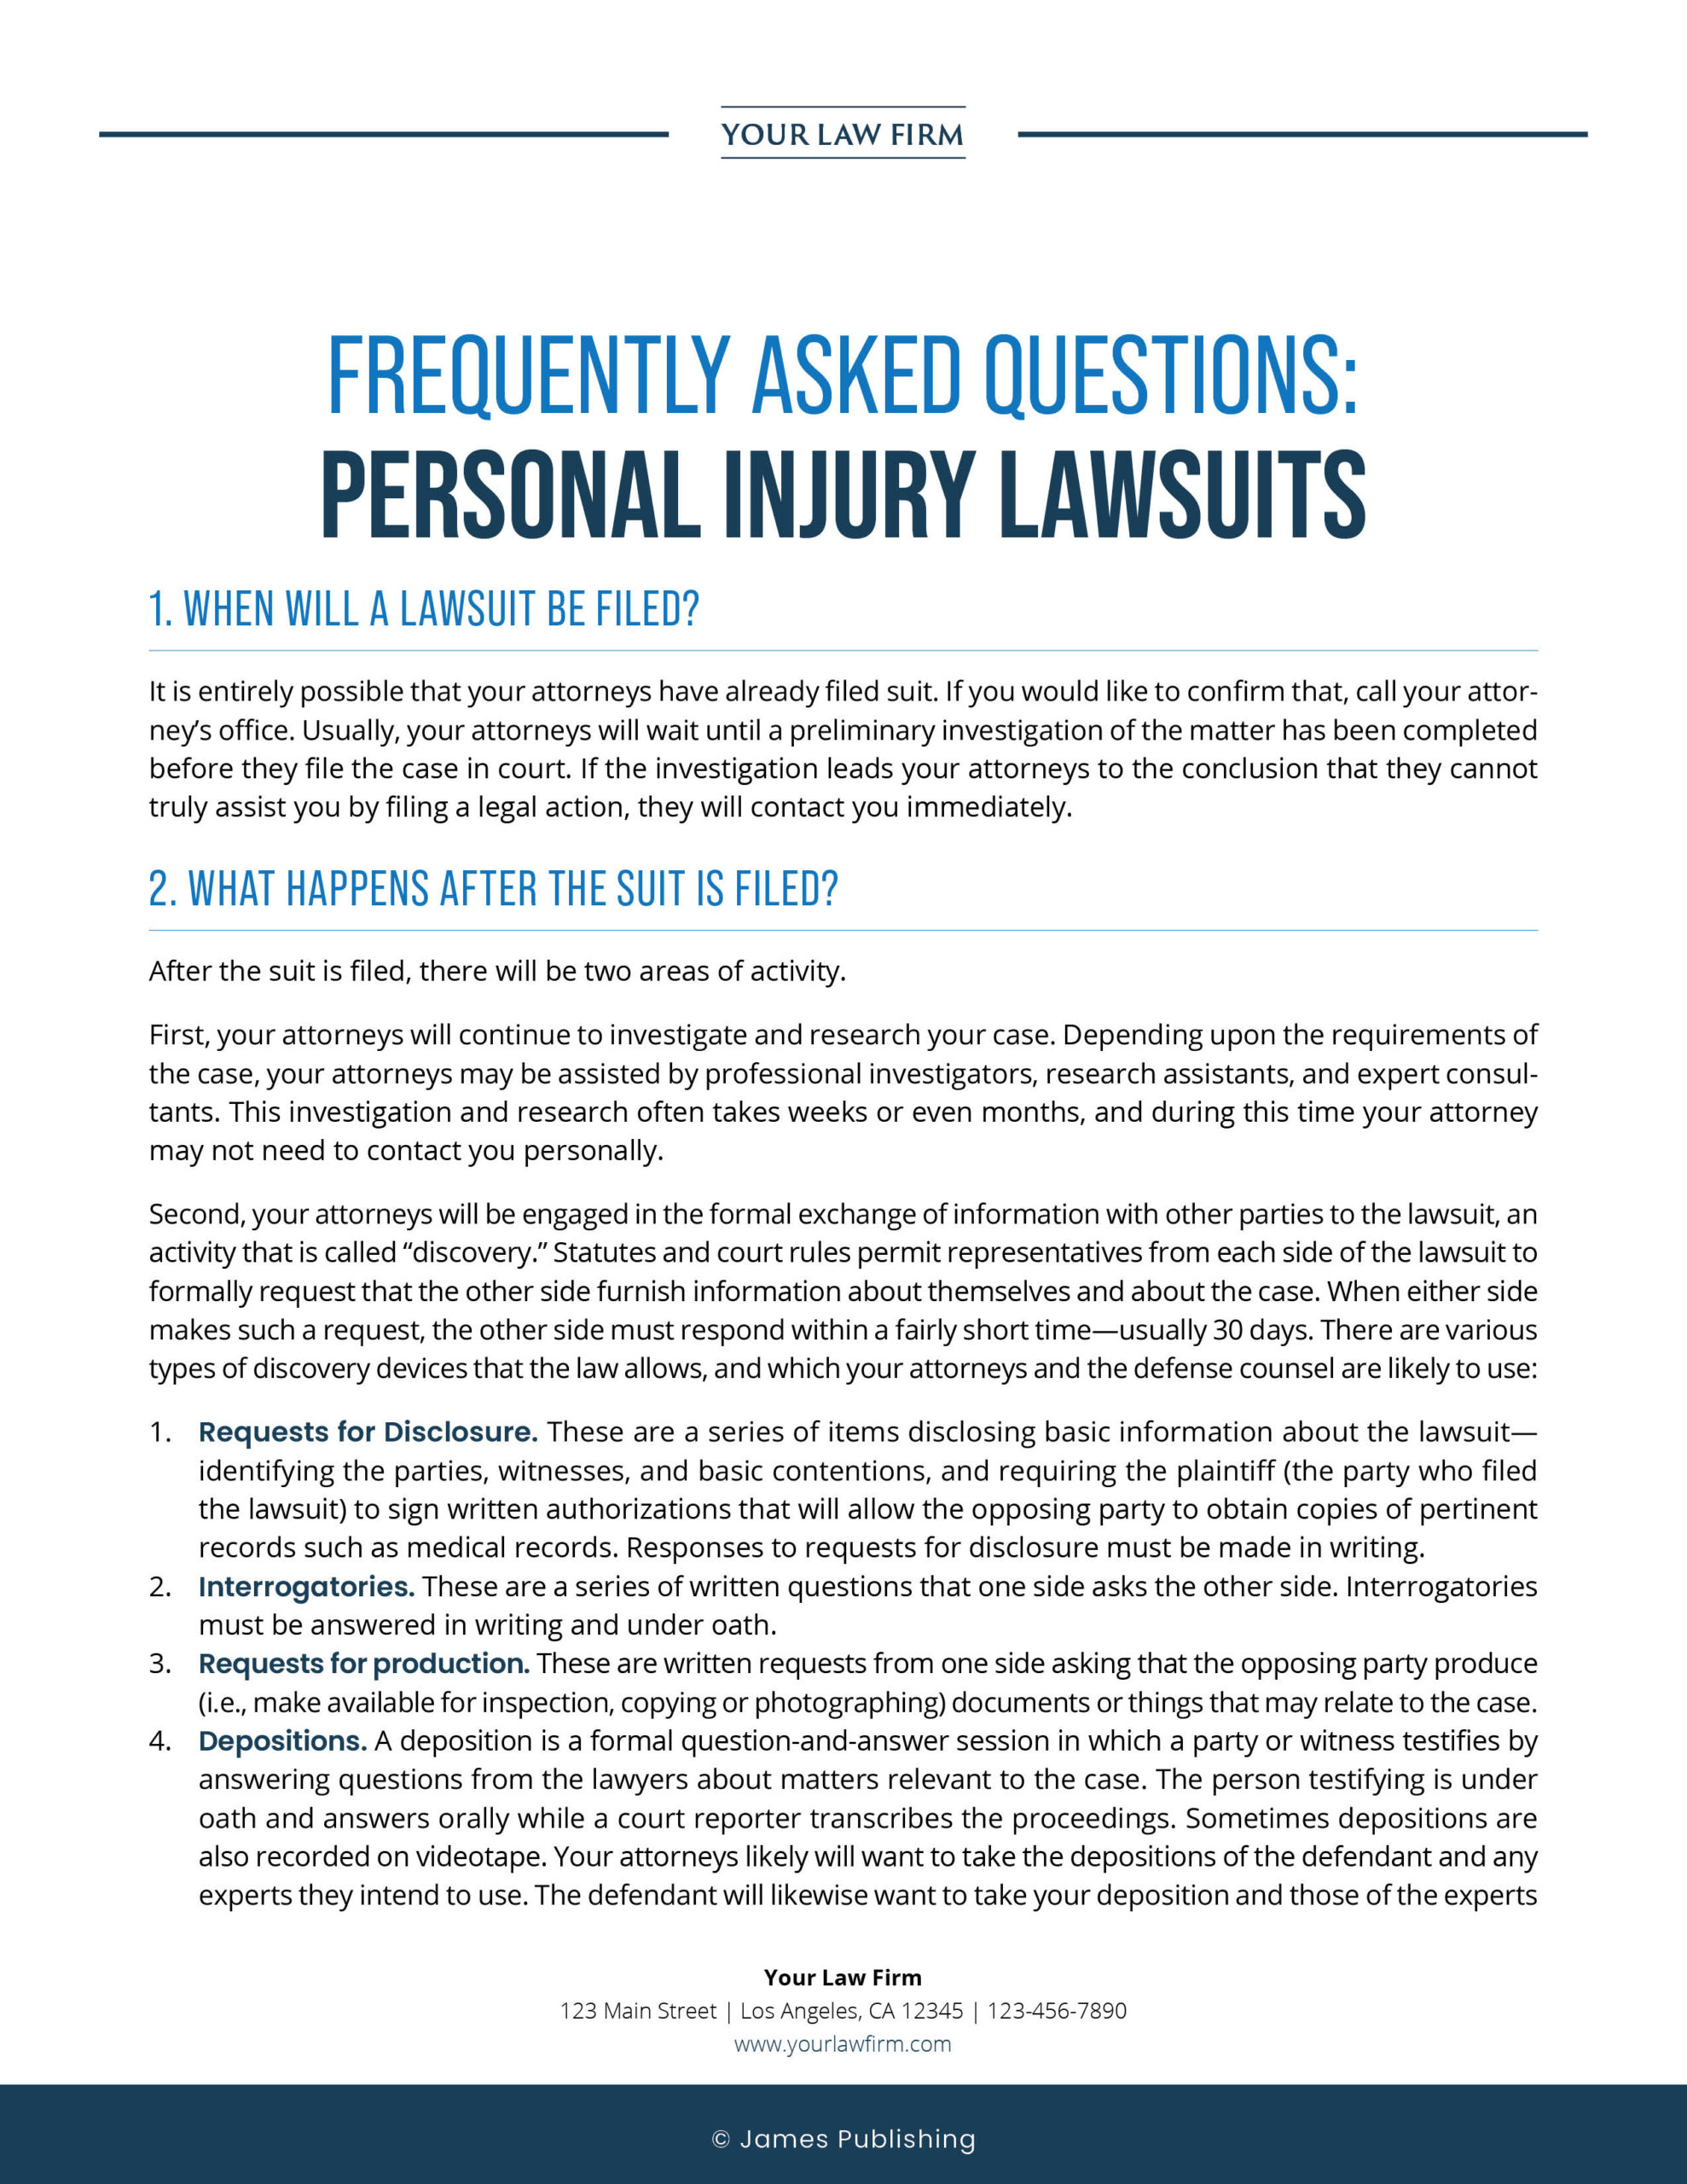 PI-15 Frequently Asked Questions: Personal Injury Lawsuit (Overview)